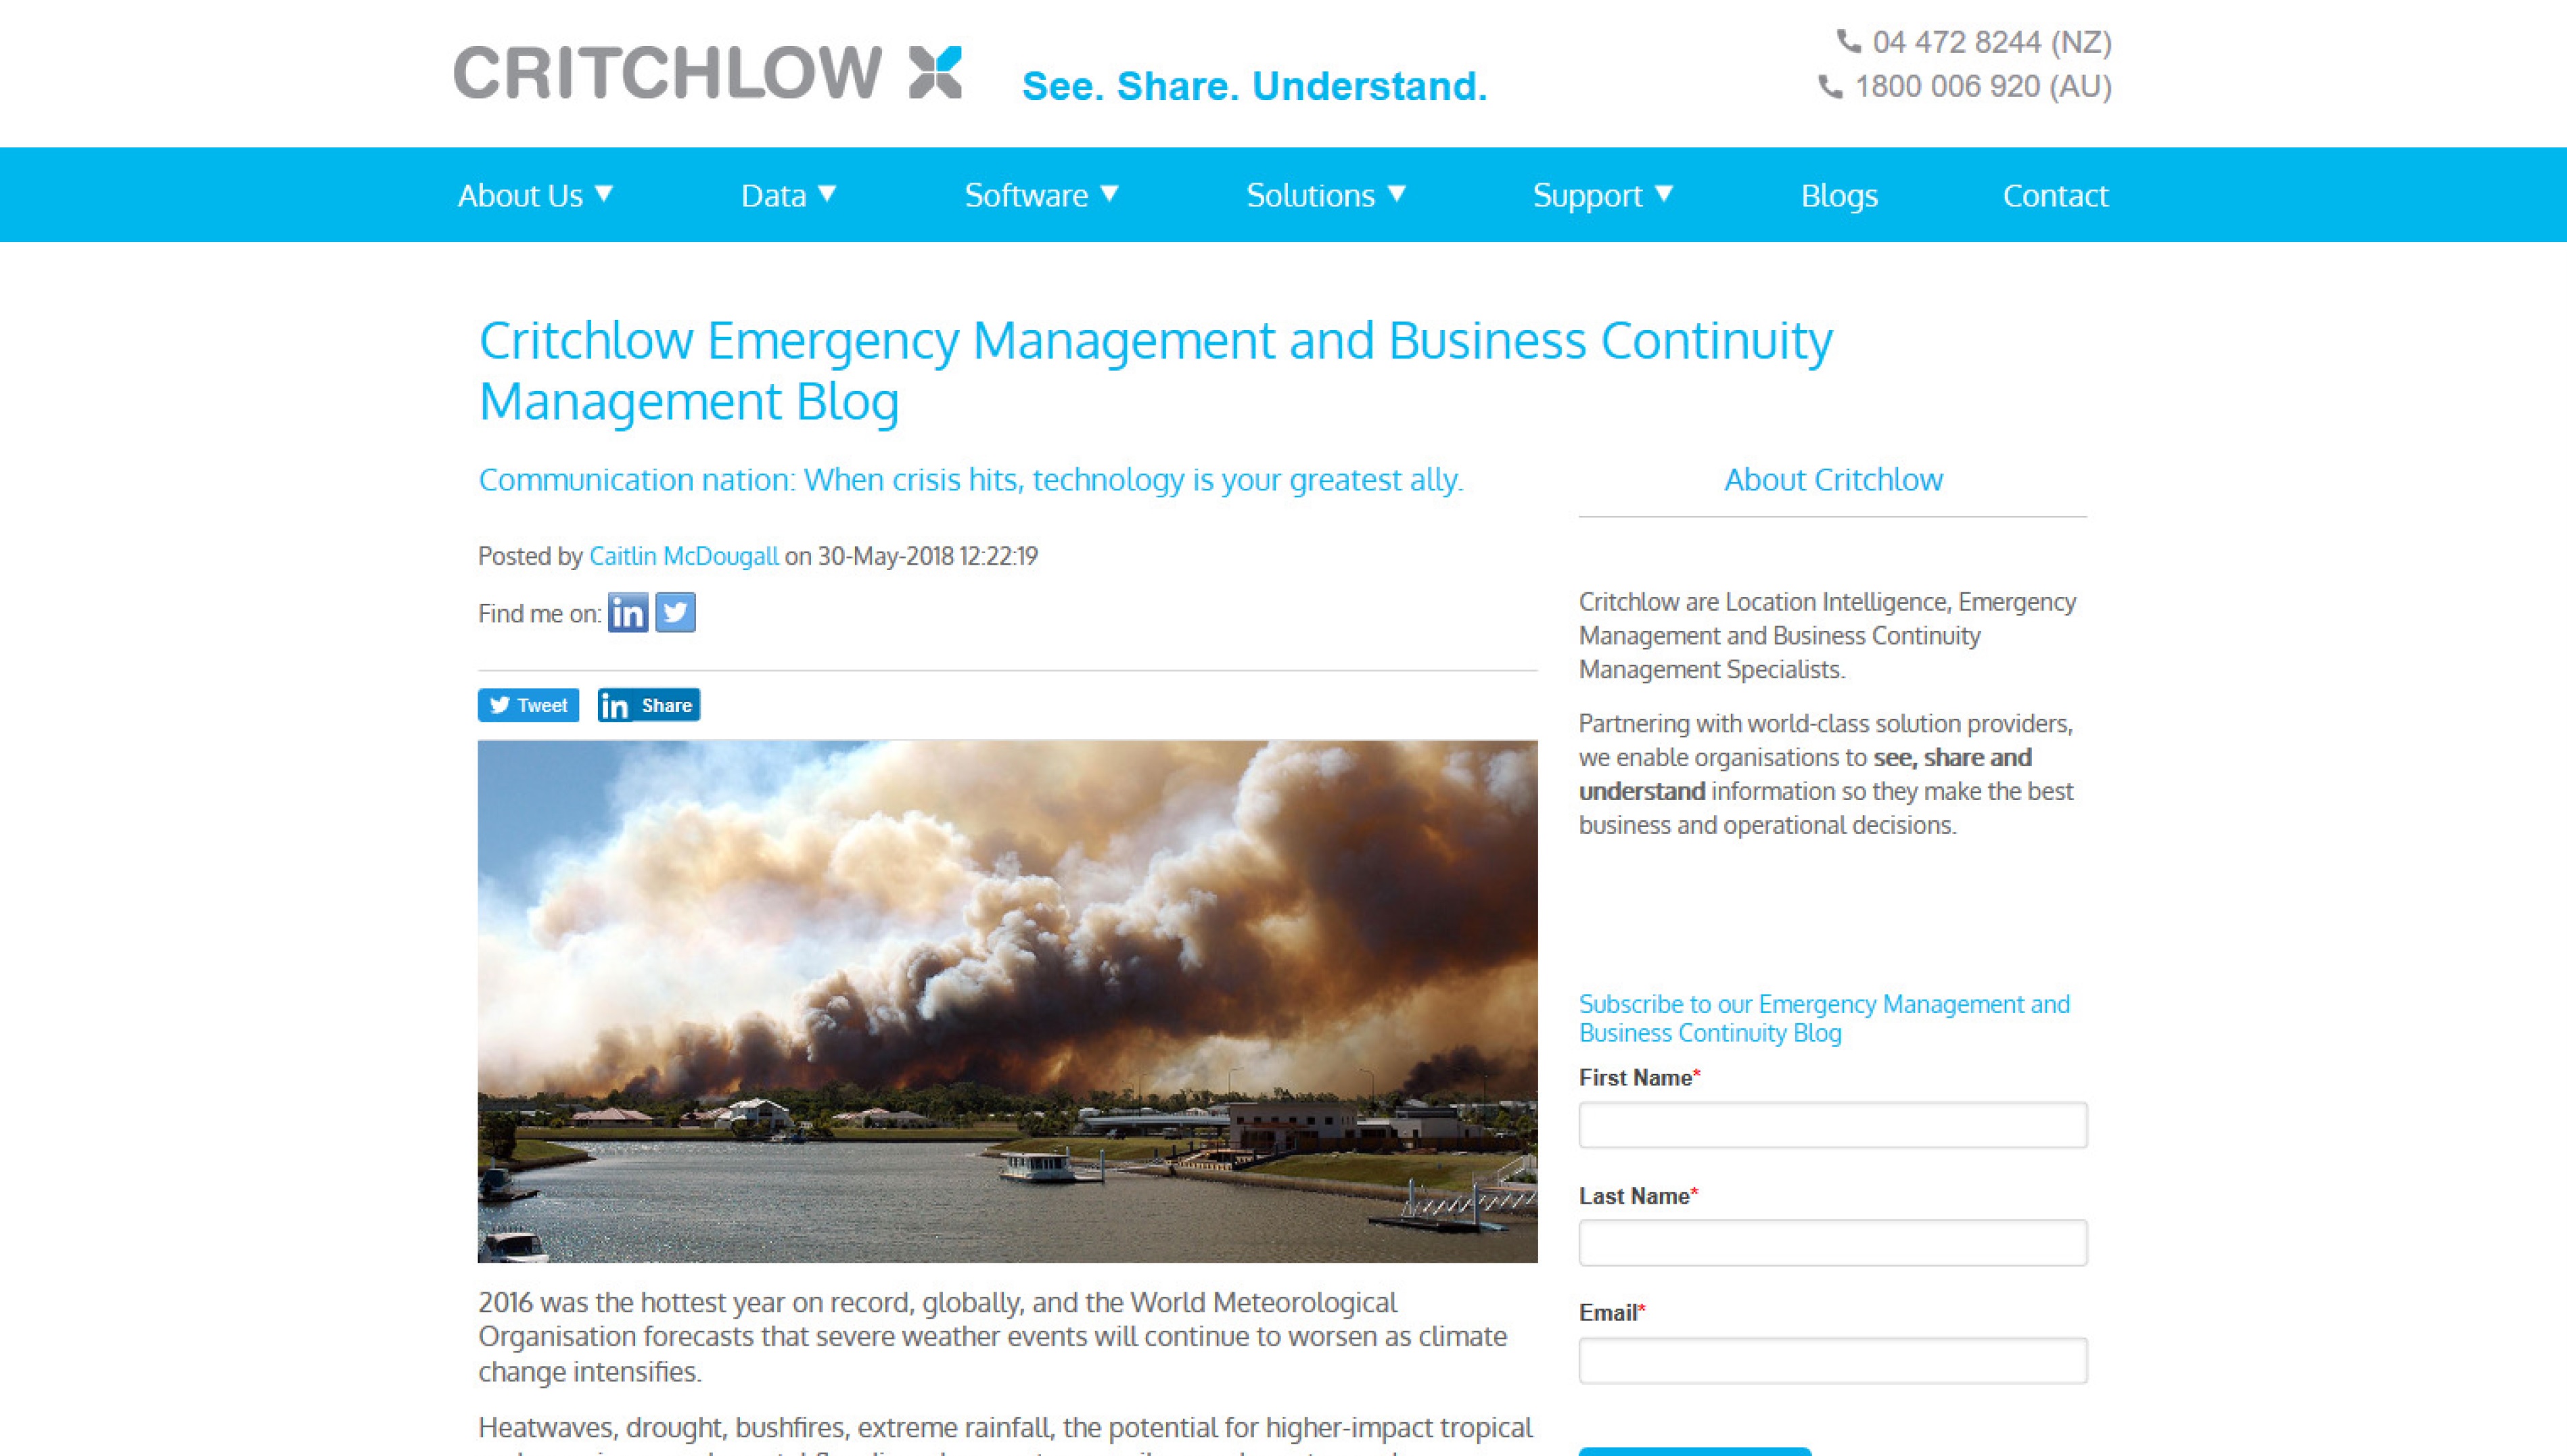 Critchlow NZ blog_Communication nation When crisis hits, technology is your greatest ally